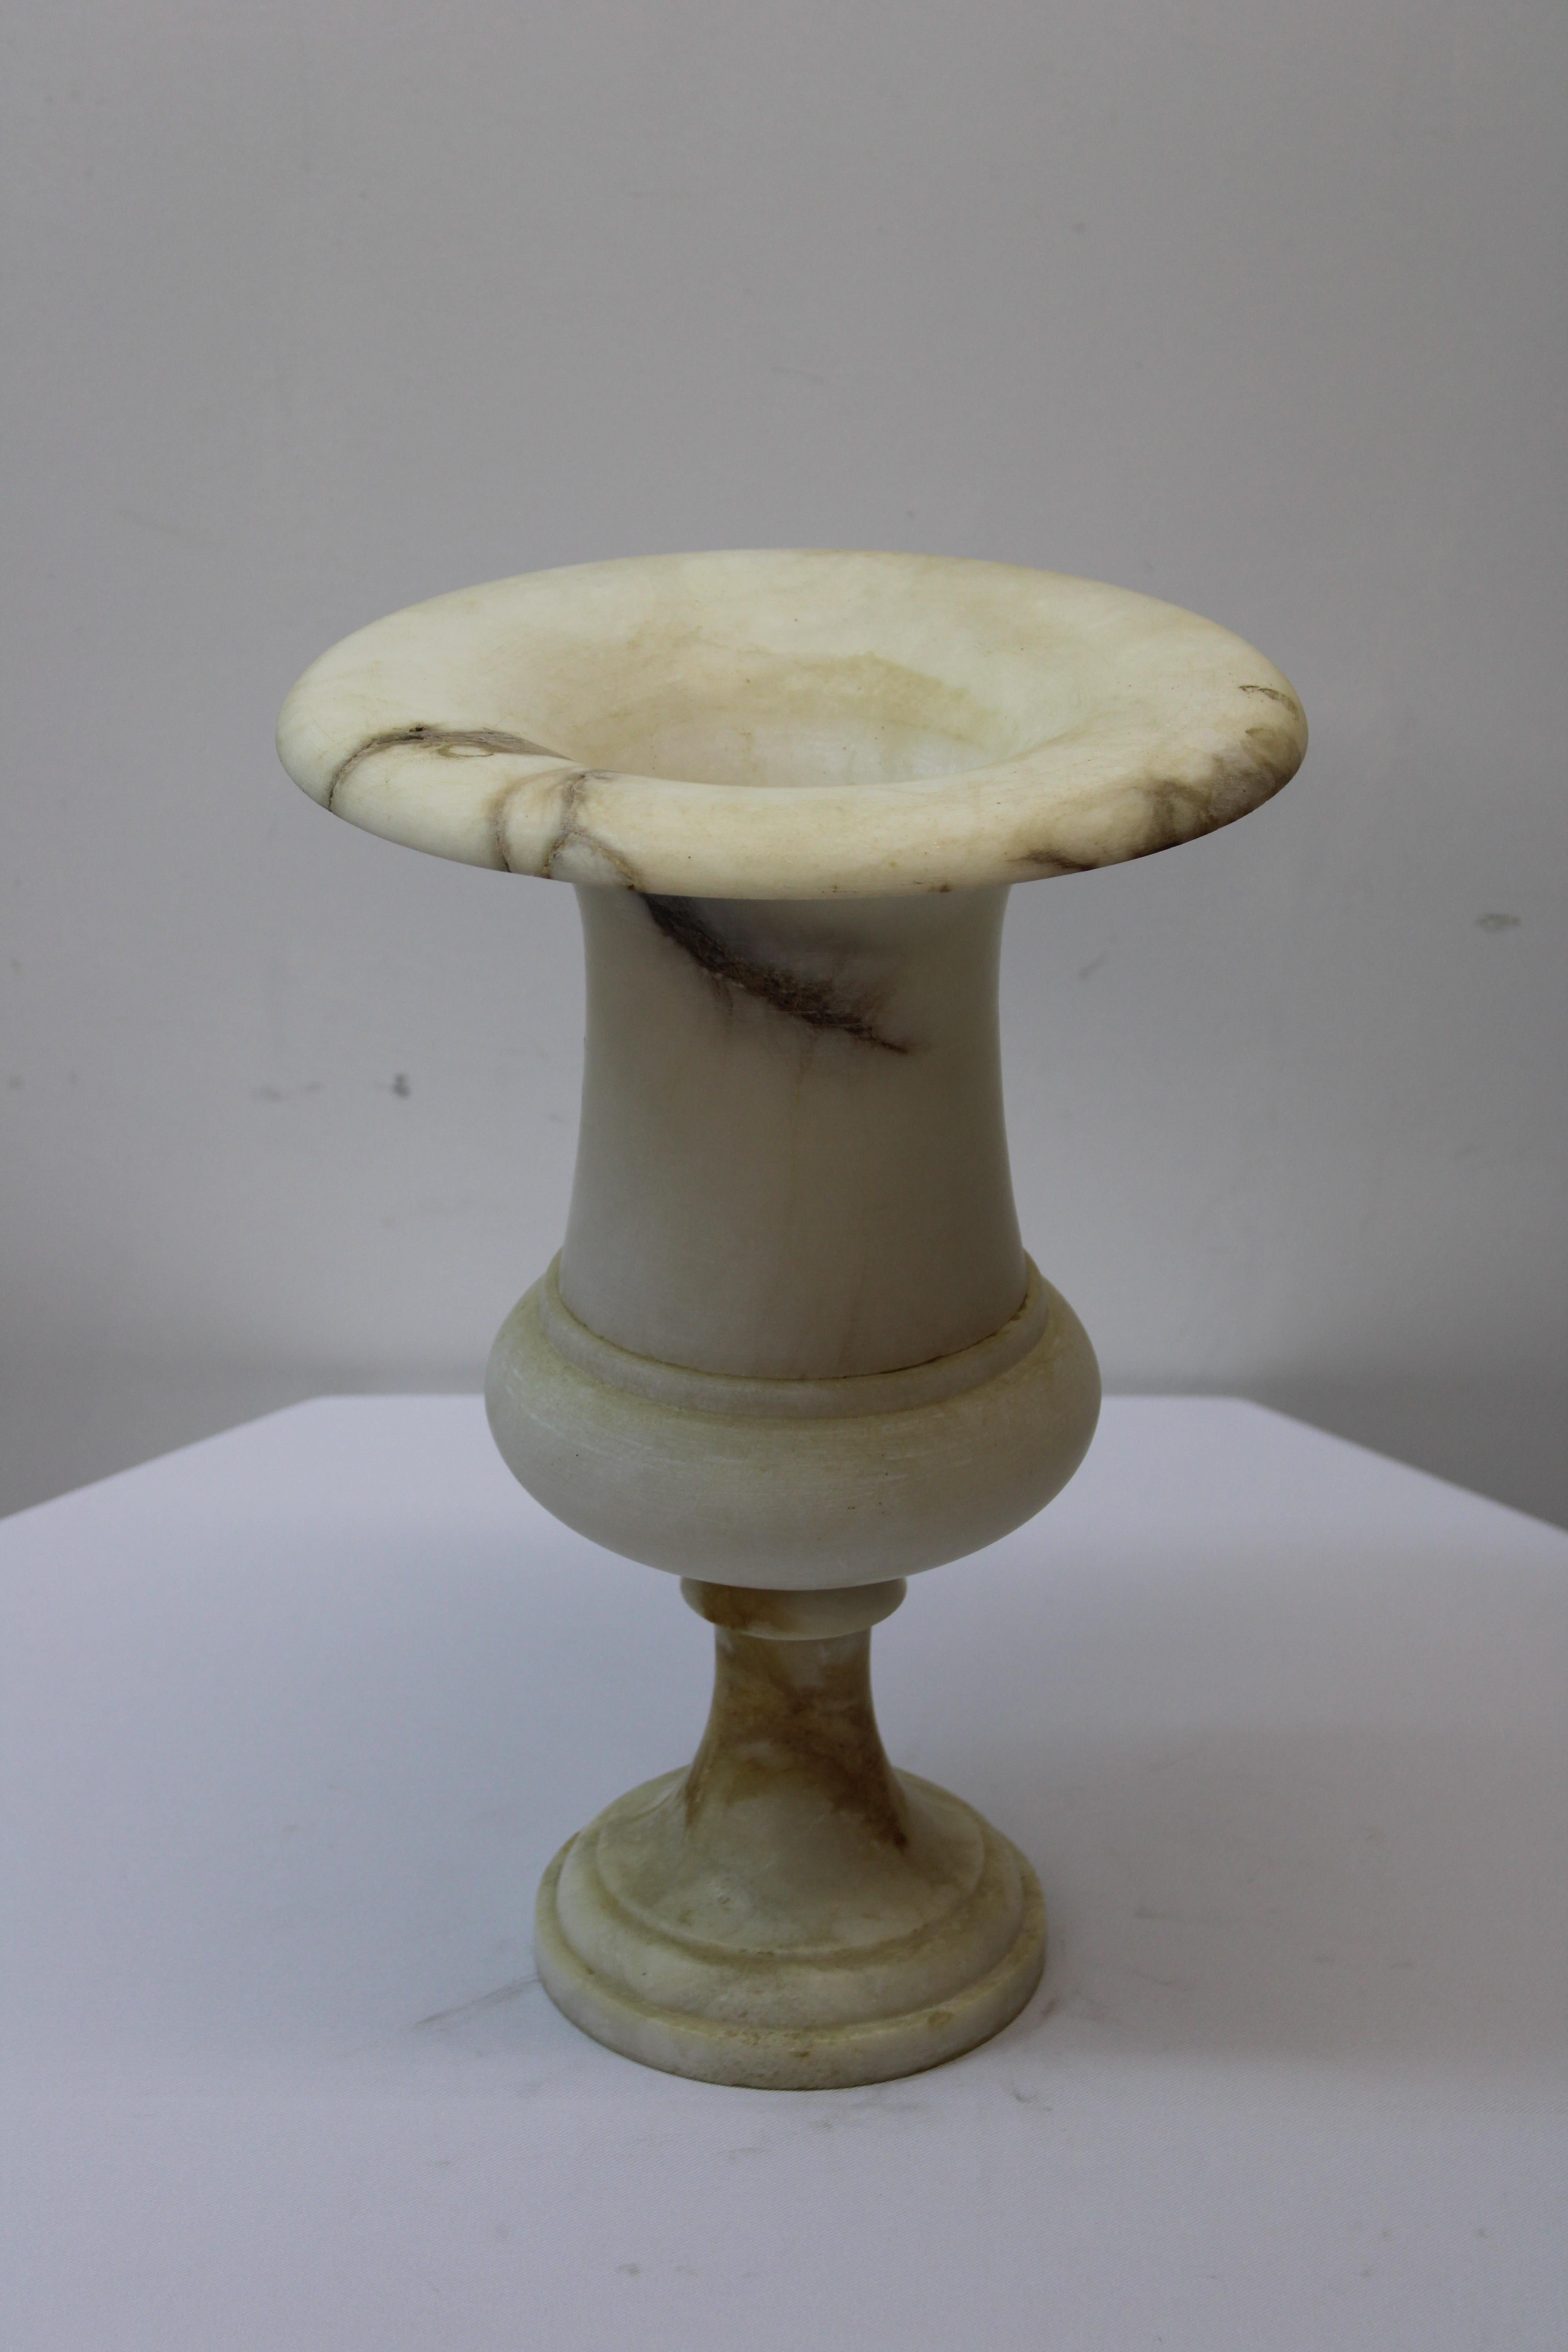 C. Early 20th century

Classic Alabaster Urn.